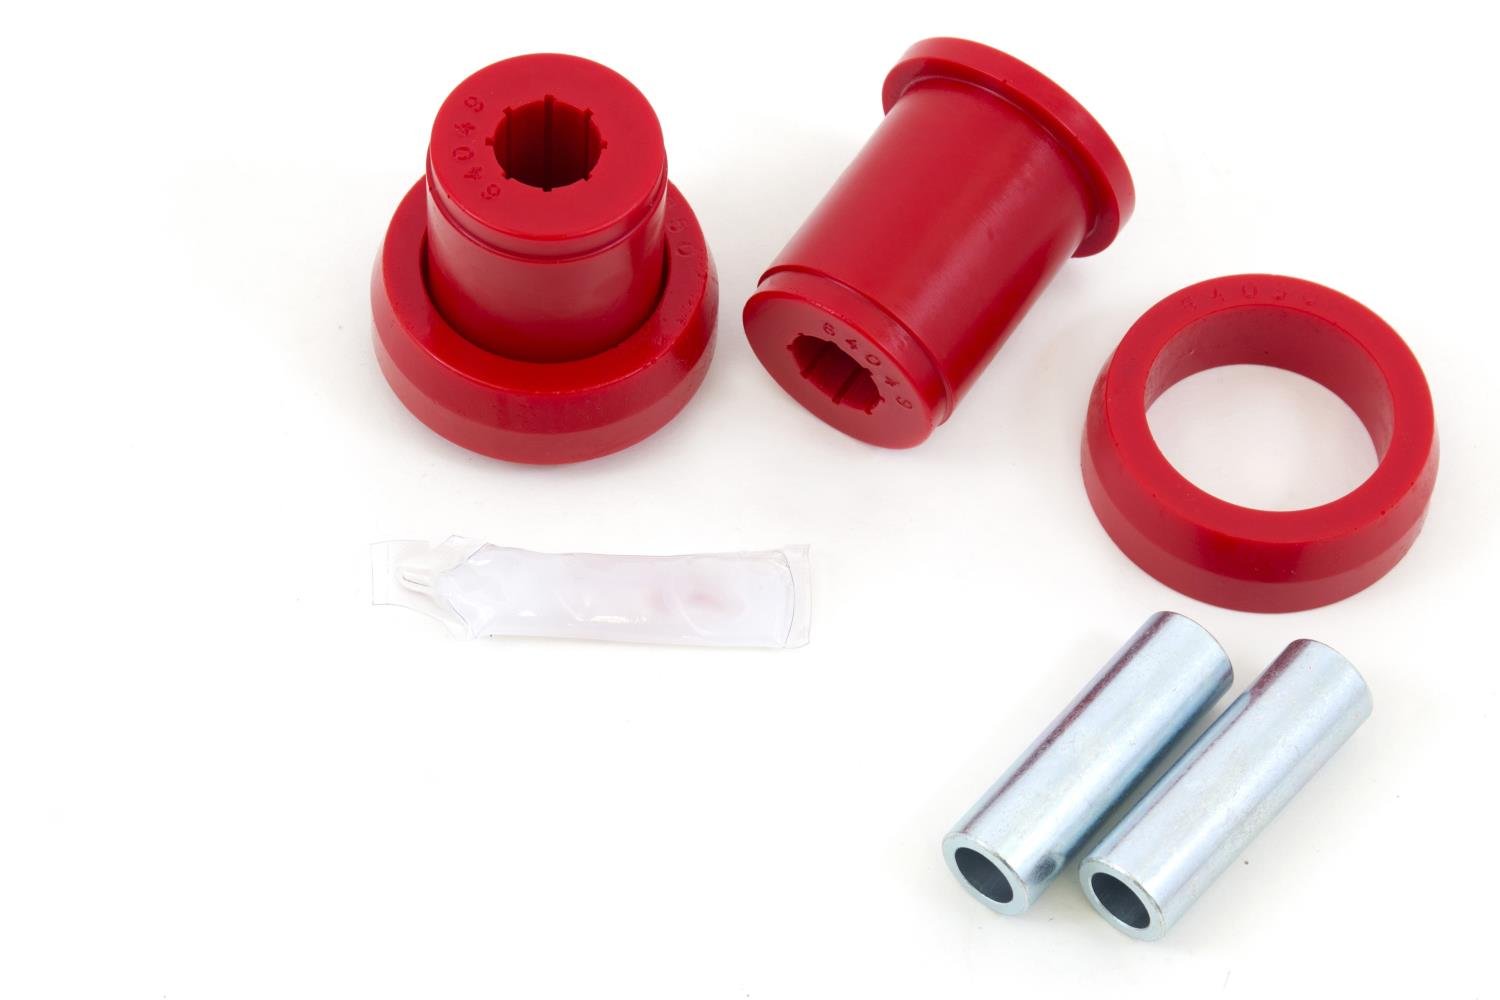 Replace the rubber factory rear end housing bushings